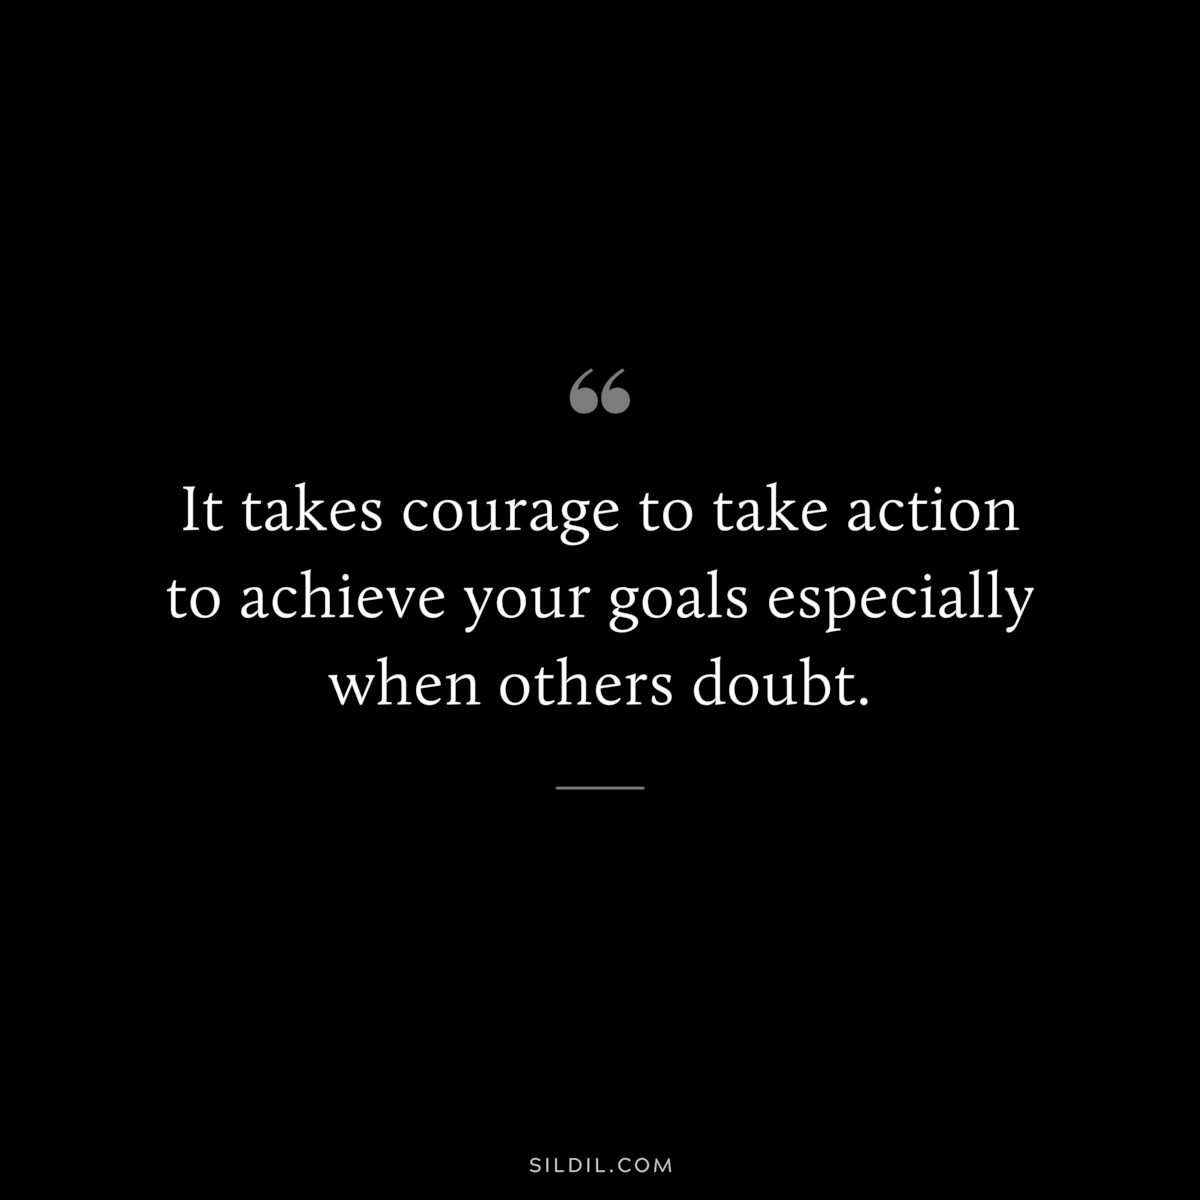 It takes courage to take action to achieve your goals especially when others doubt.